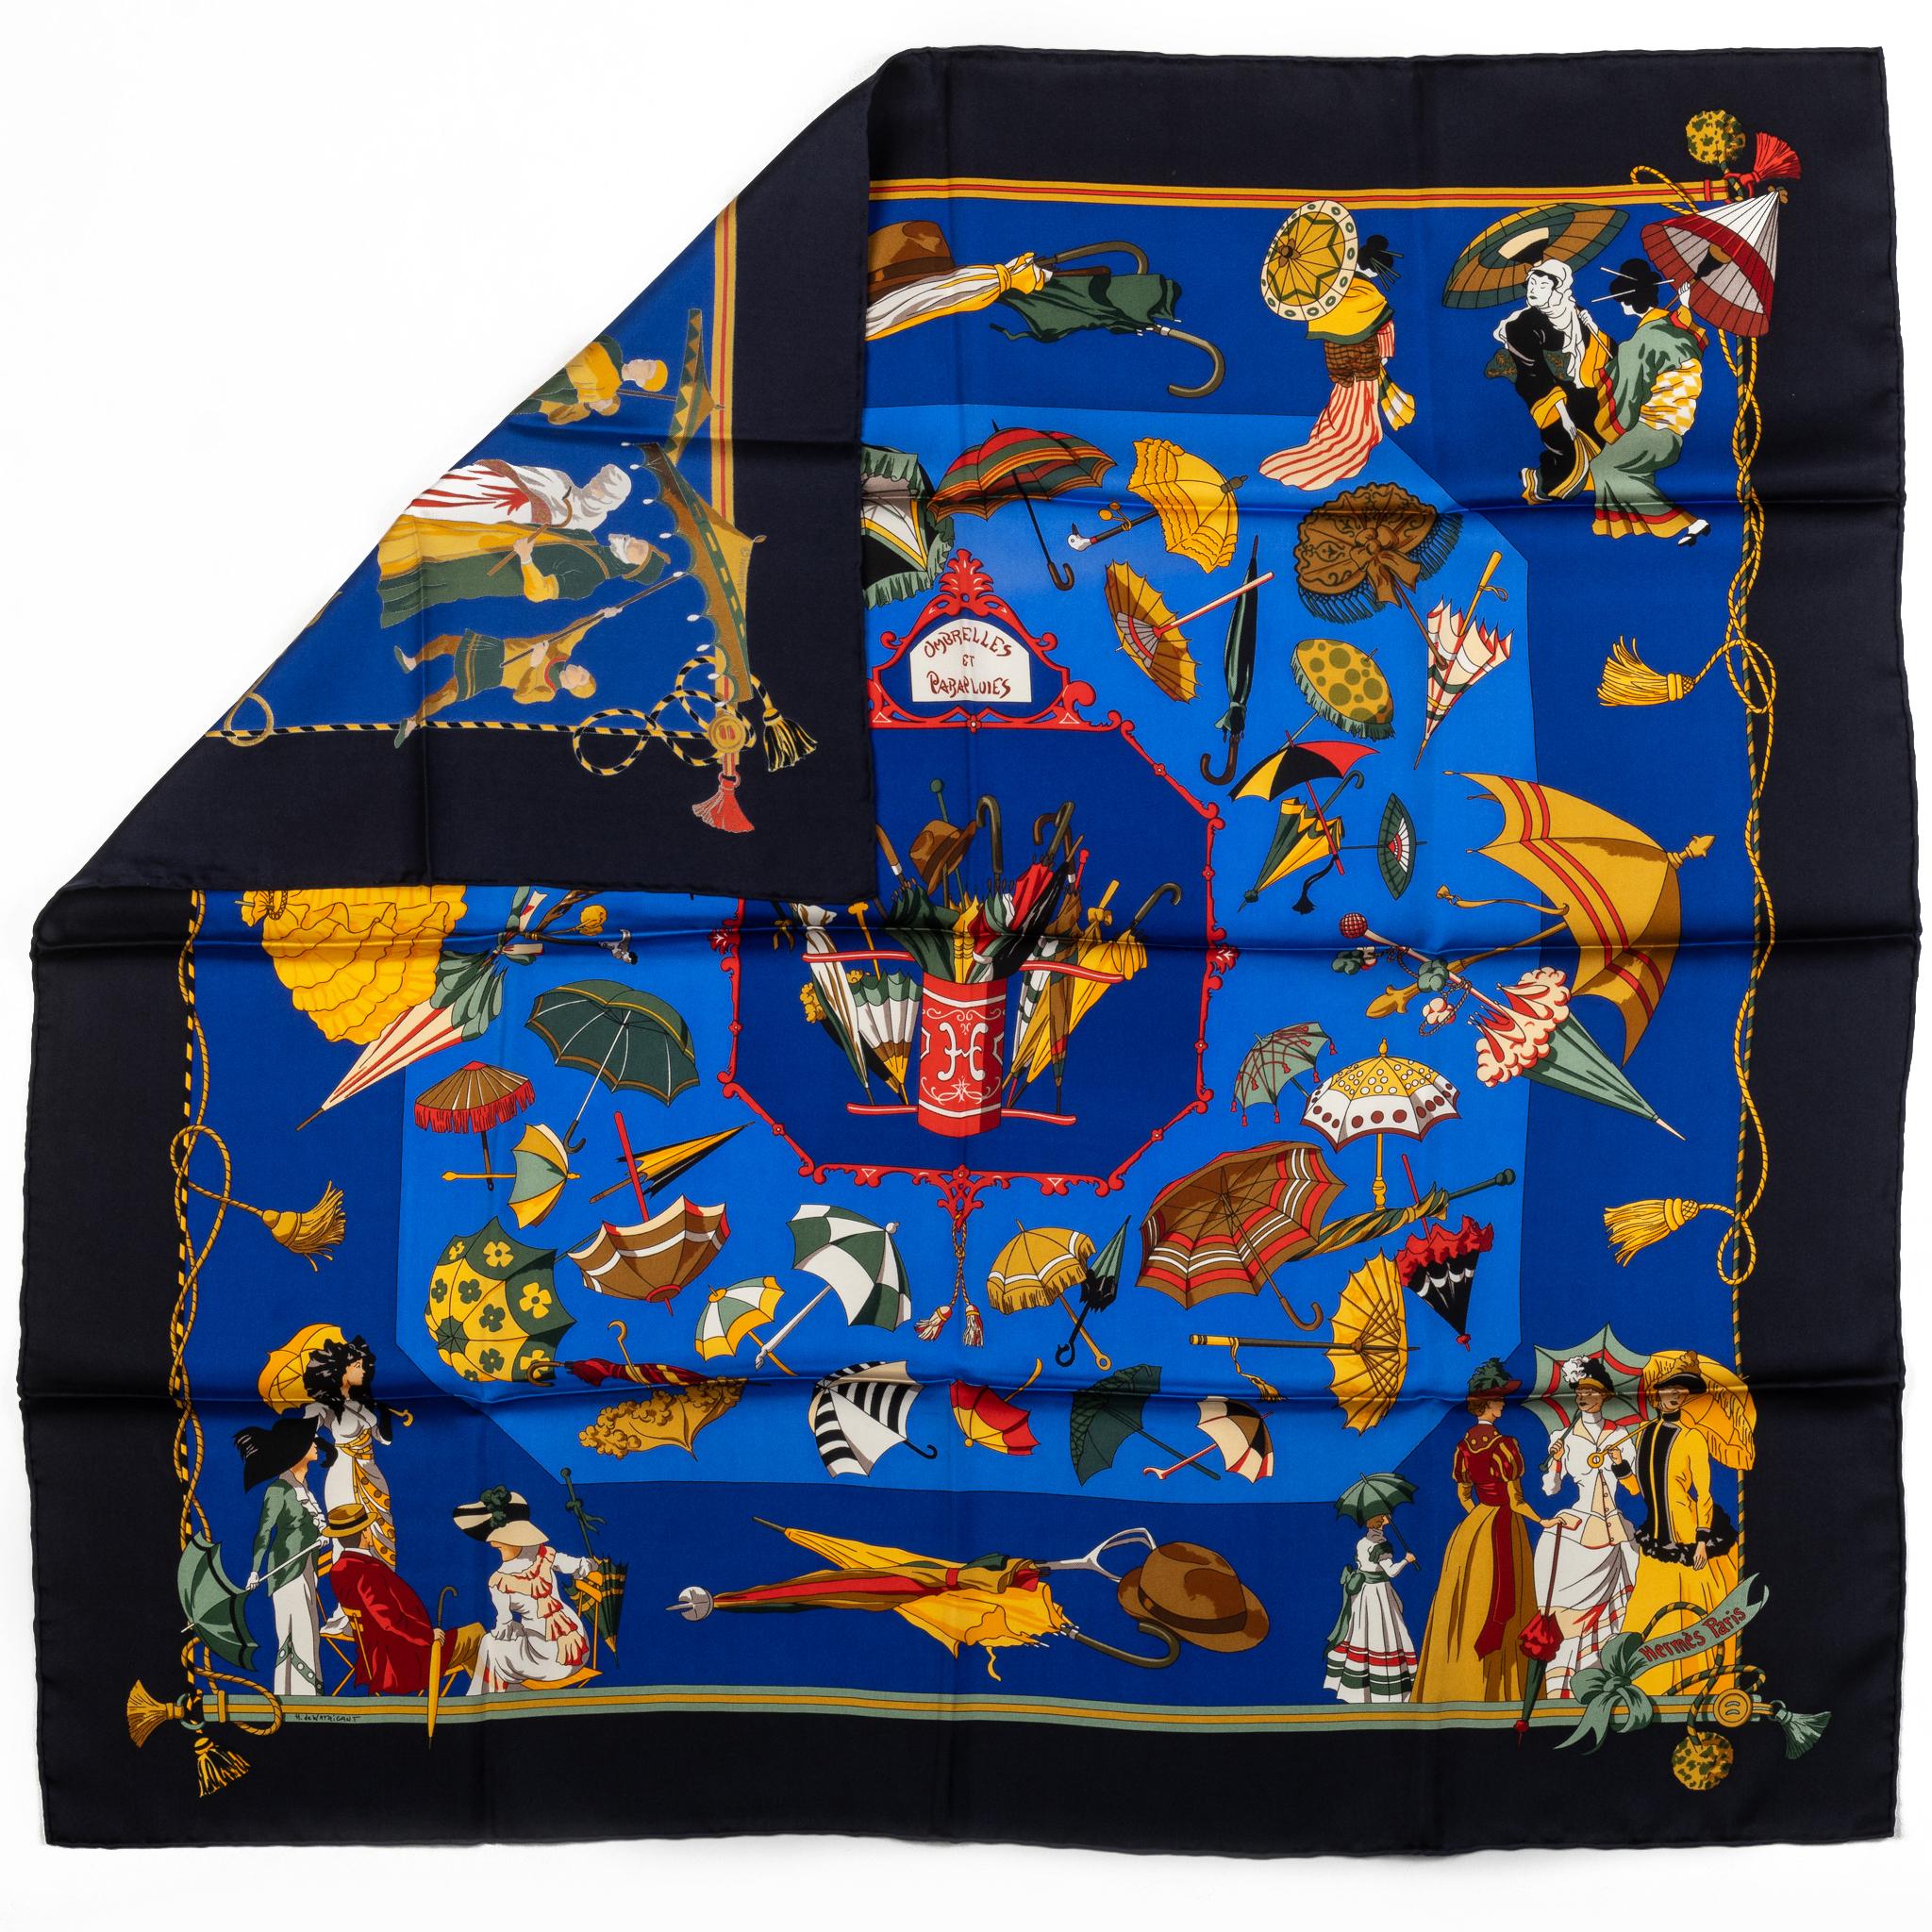 Hermes collectible umbrellas silk scarf in blue and yellow. Hand rolled edges. No box included.